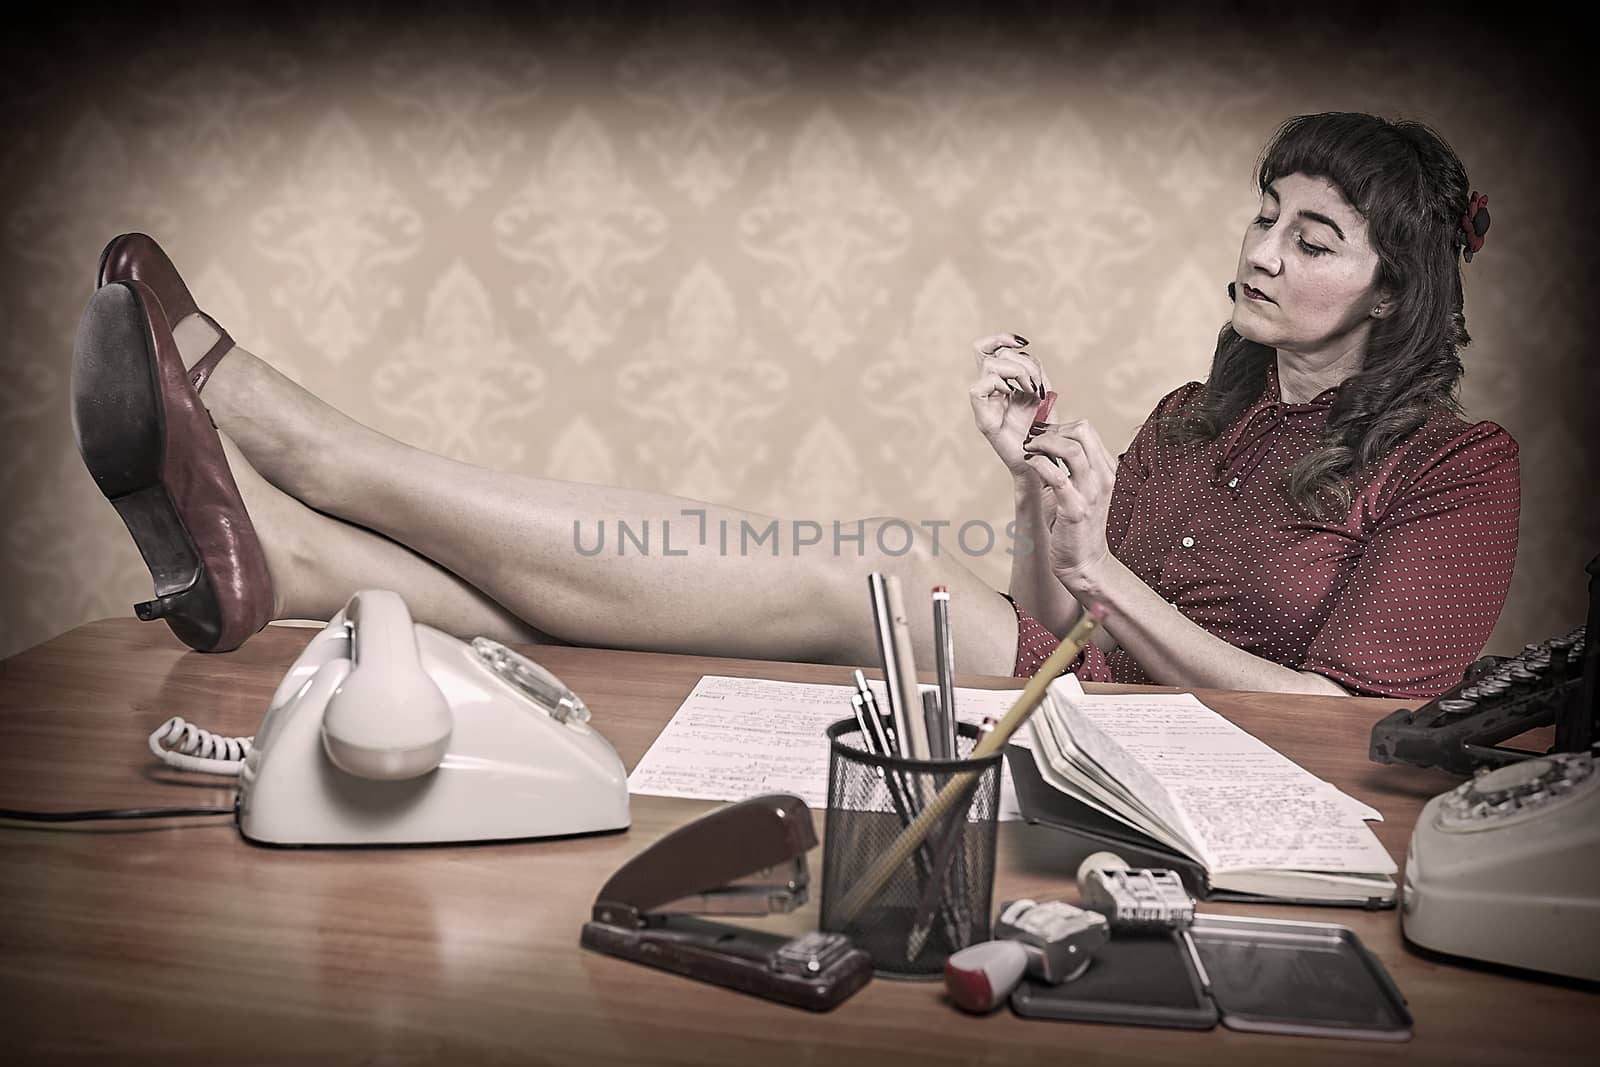 Young secretary with a nail file in the office, 1960's scene by digicomphoto